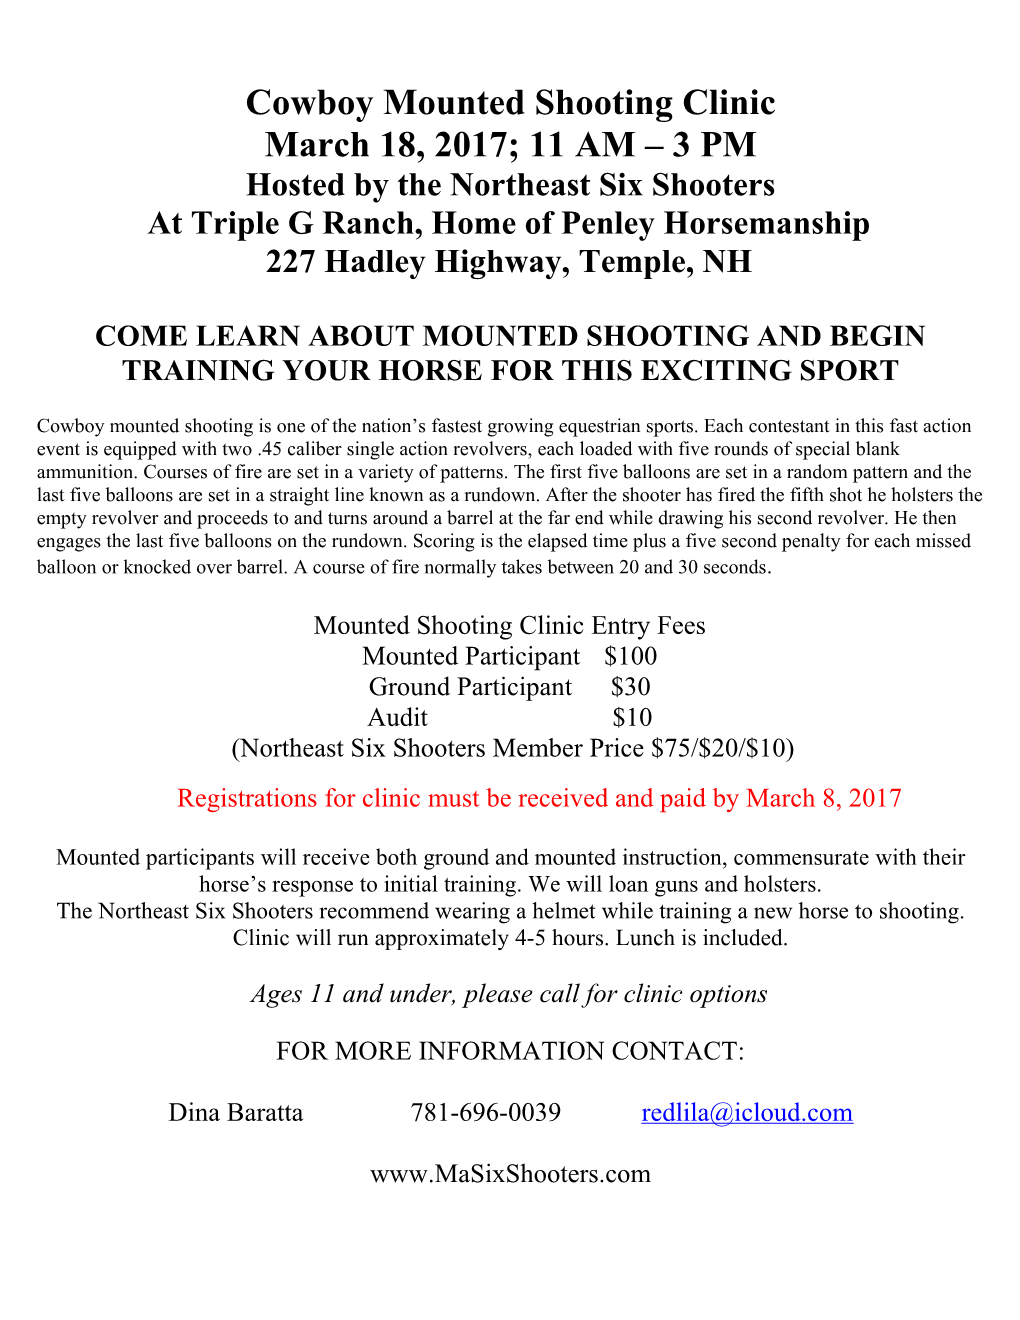 New Shooters Clinic